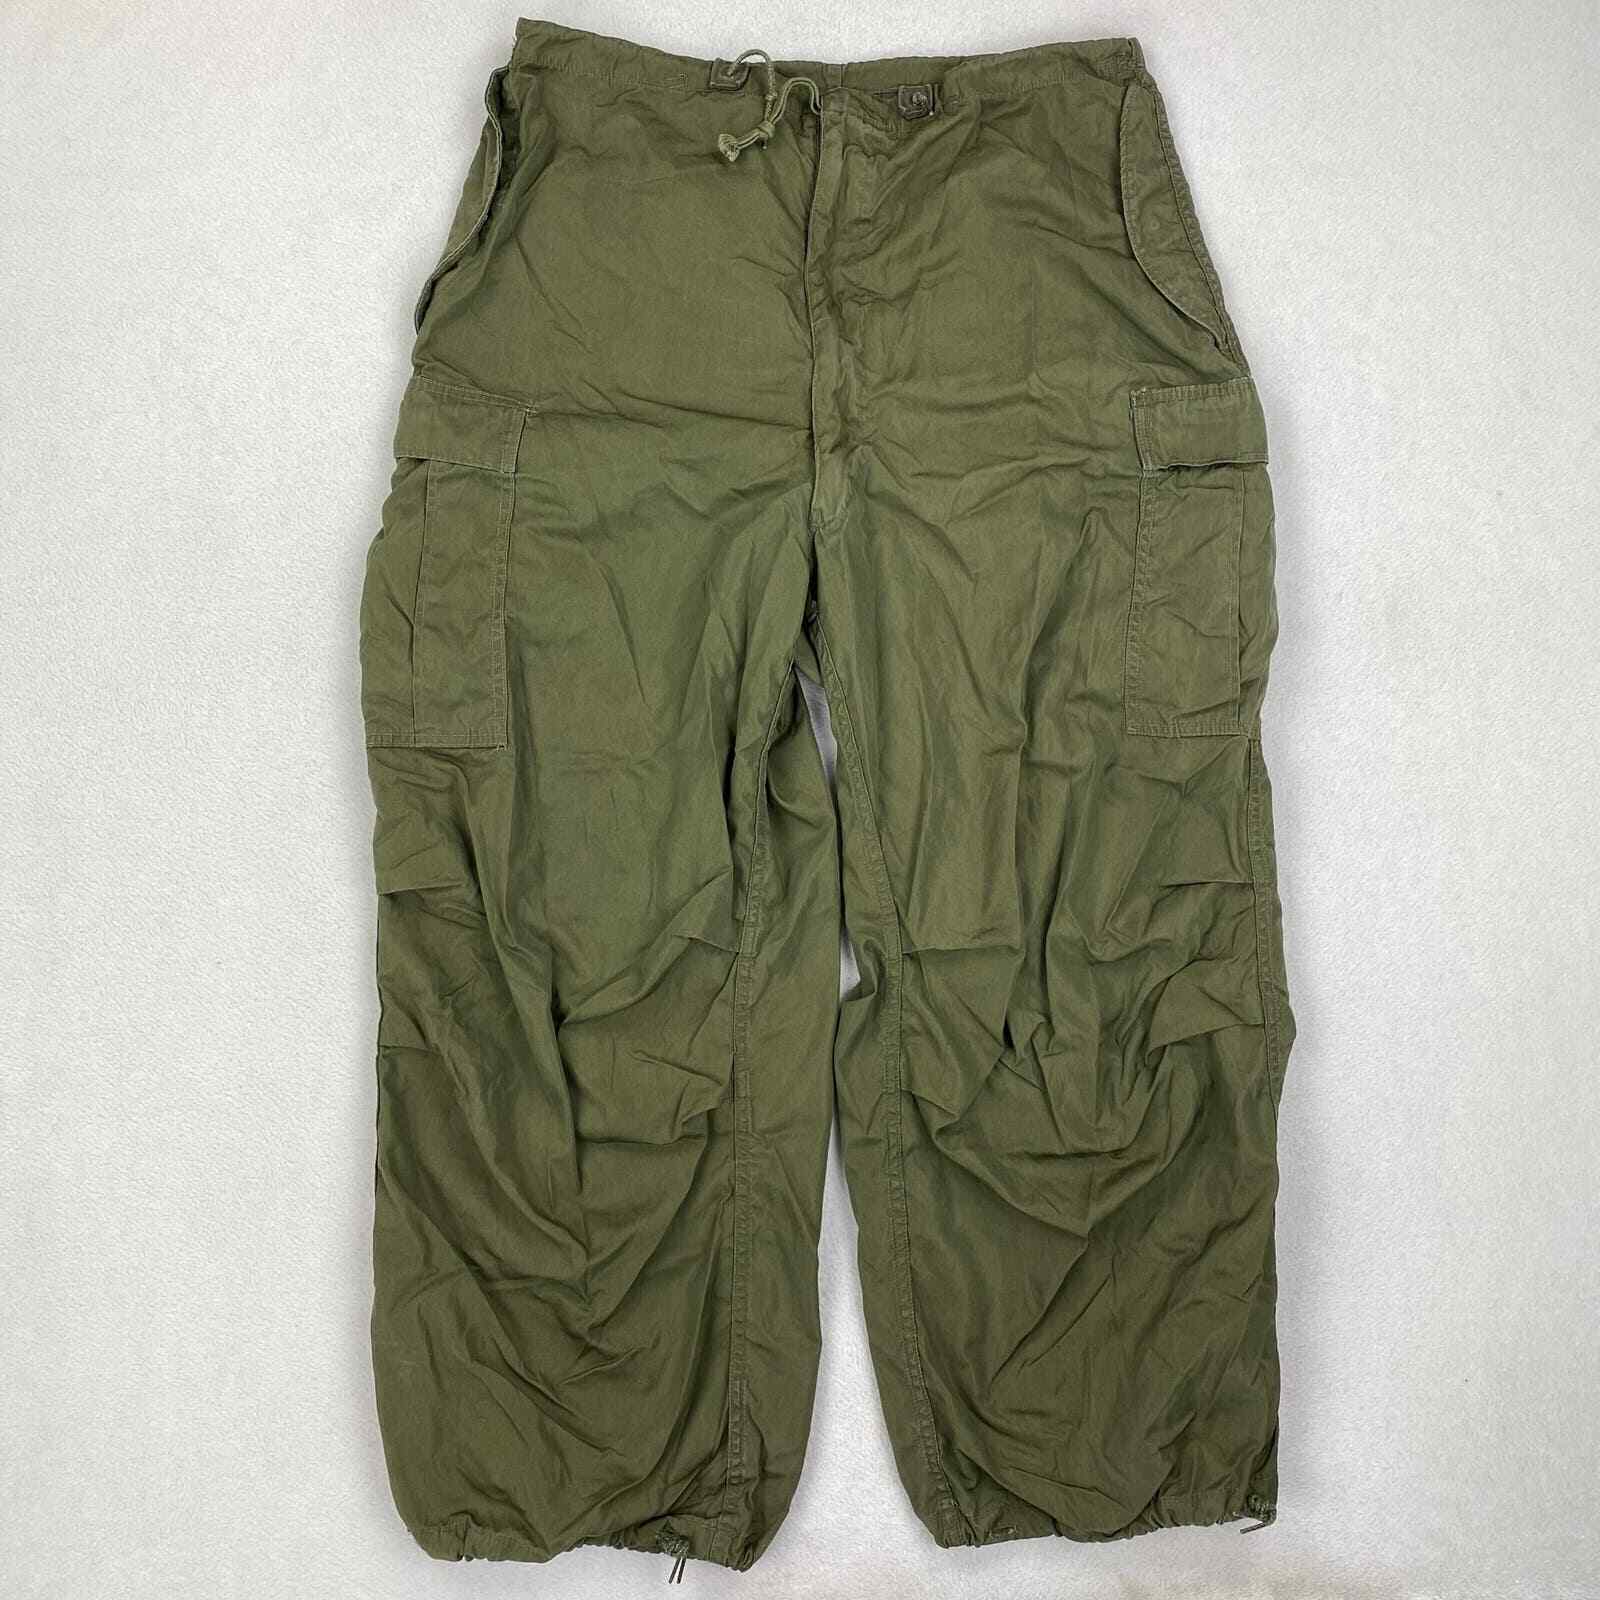 Vintage M-1951 Arctic Shell Trousers Pants Size Medium Long Green US Army Marine